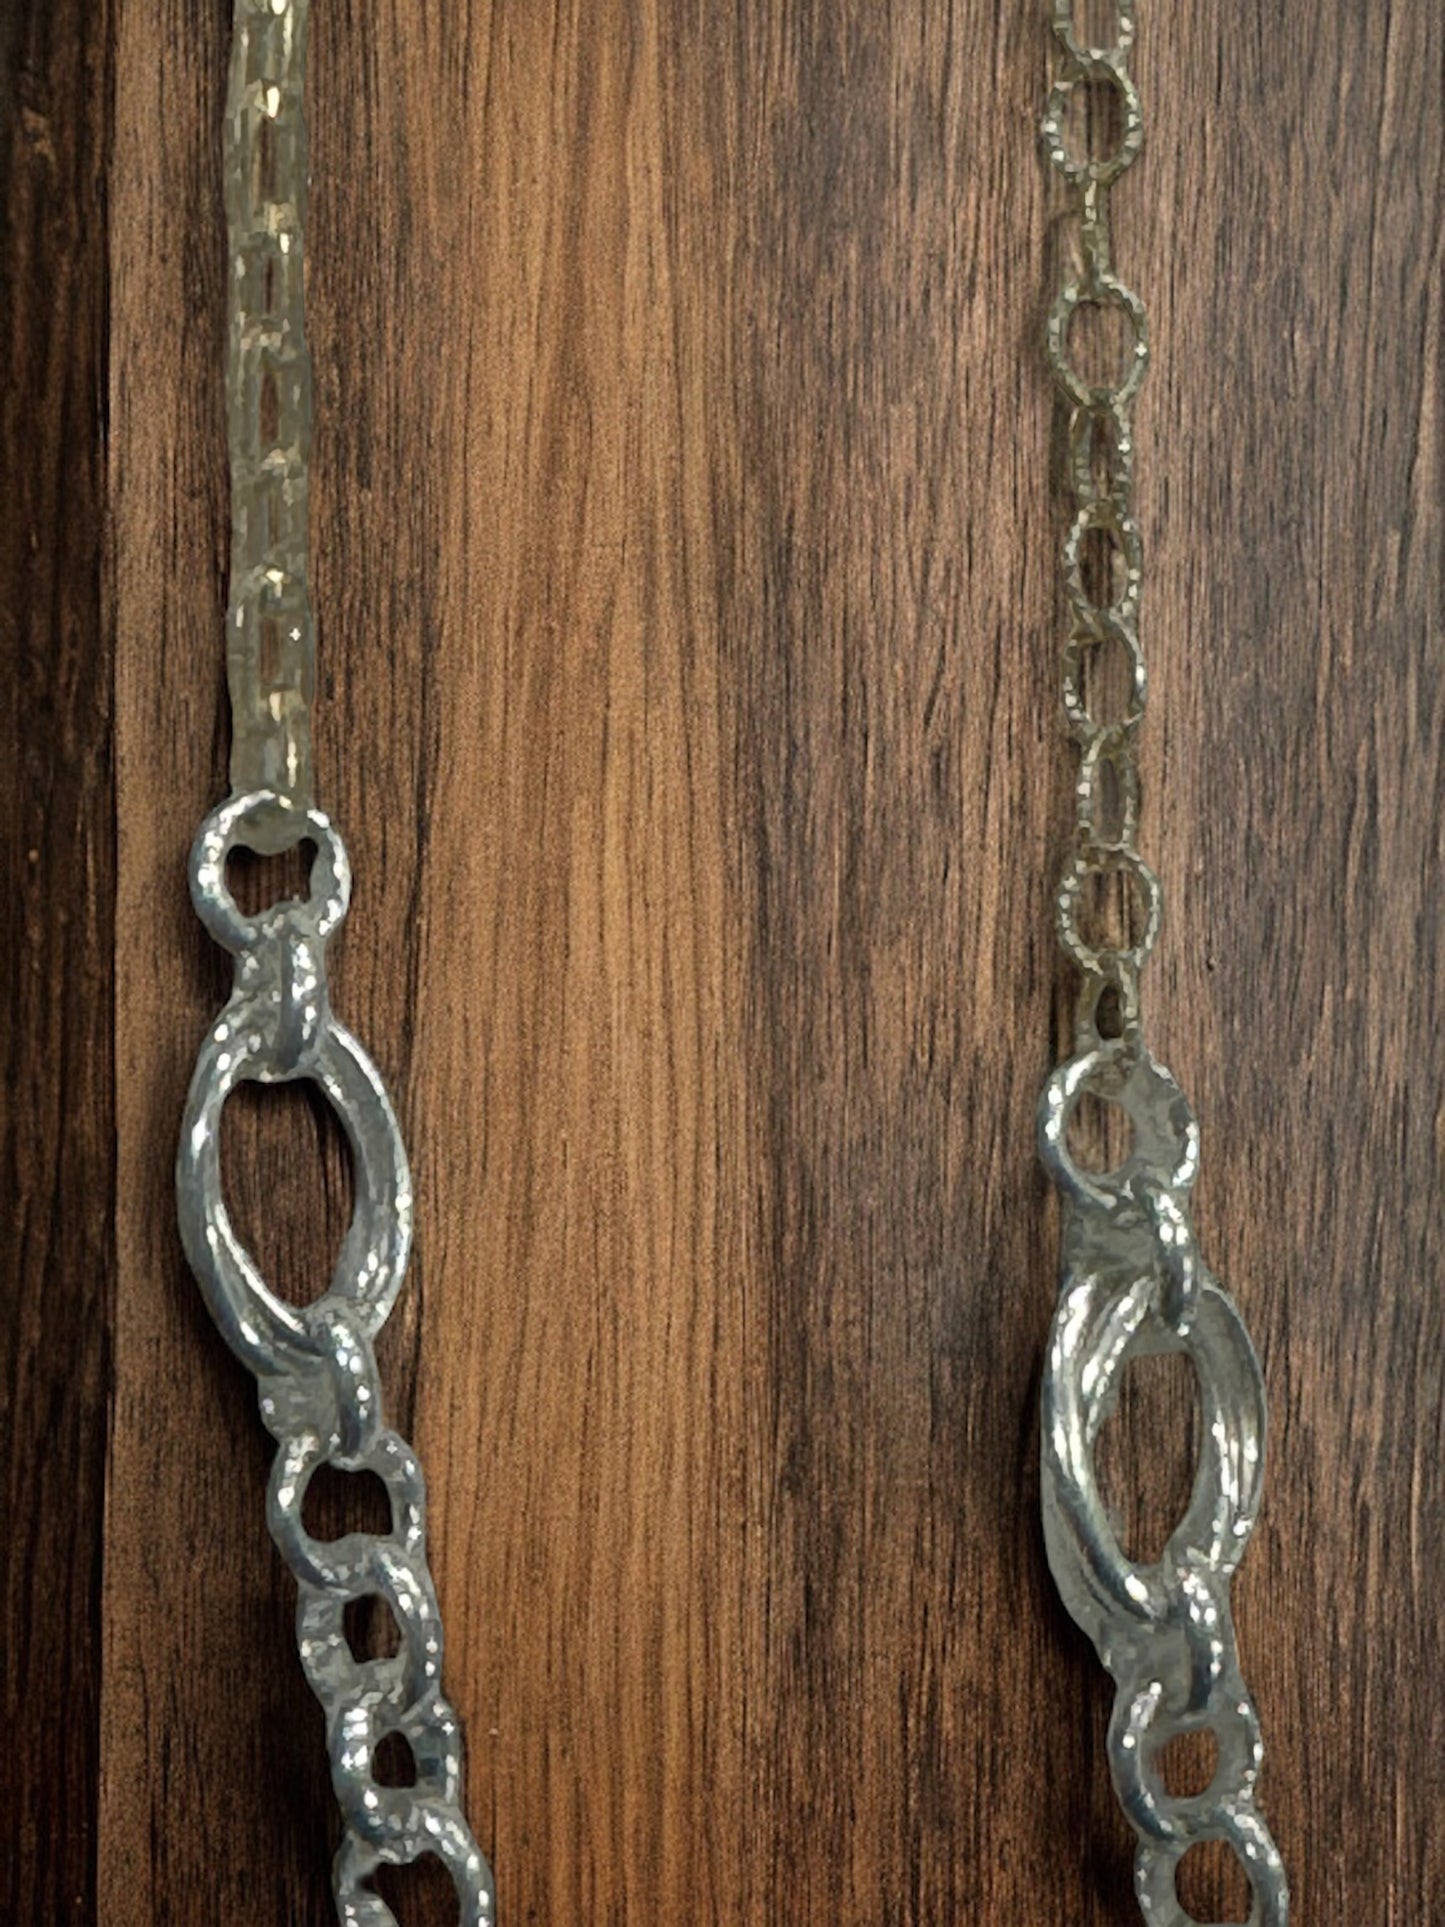 Mixed Media Sterling and 14kGF Long Chain